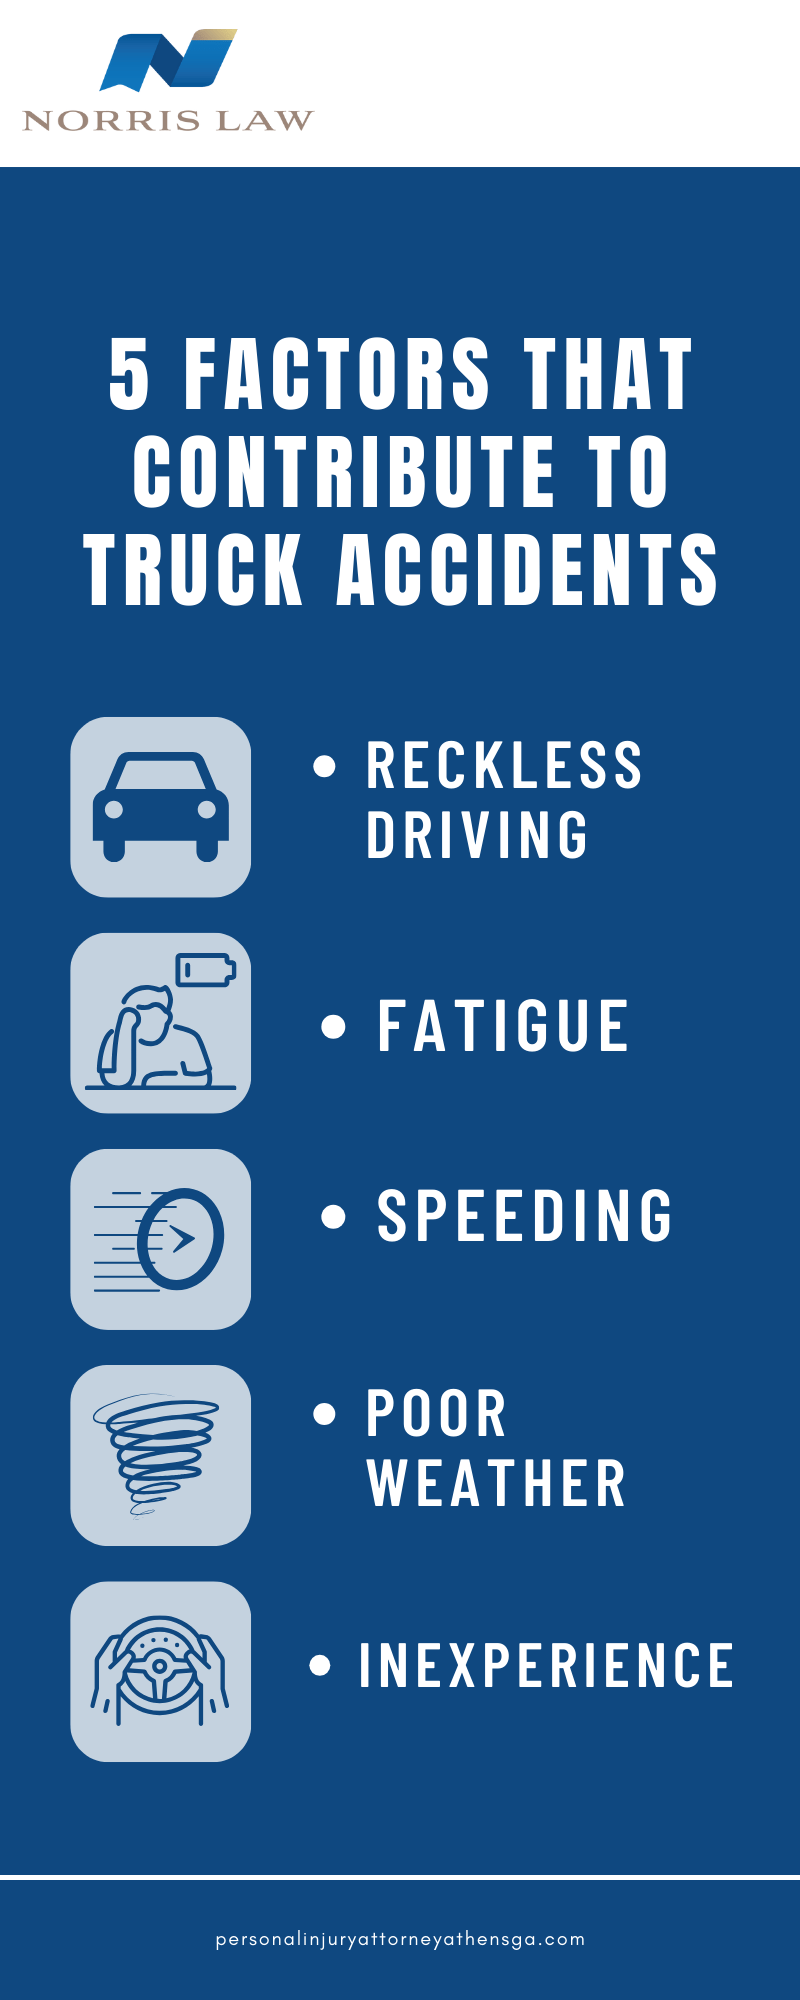 5 Factors That Contribute To Truck Accidents Infographic